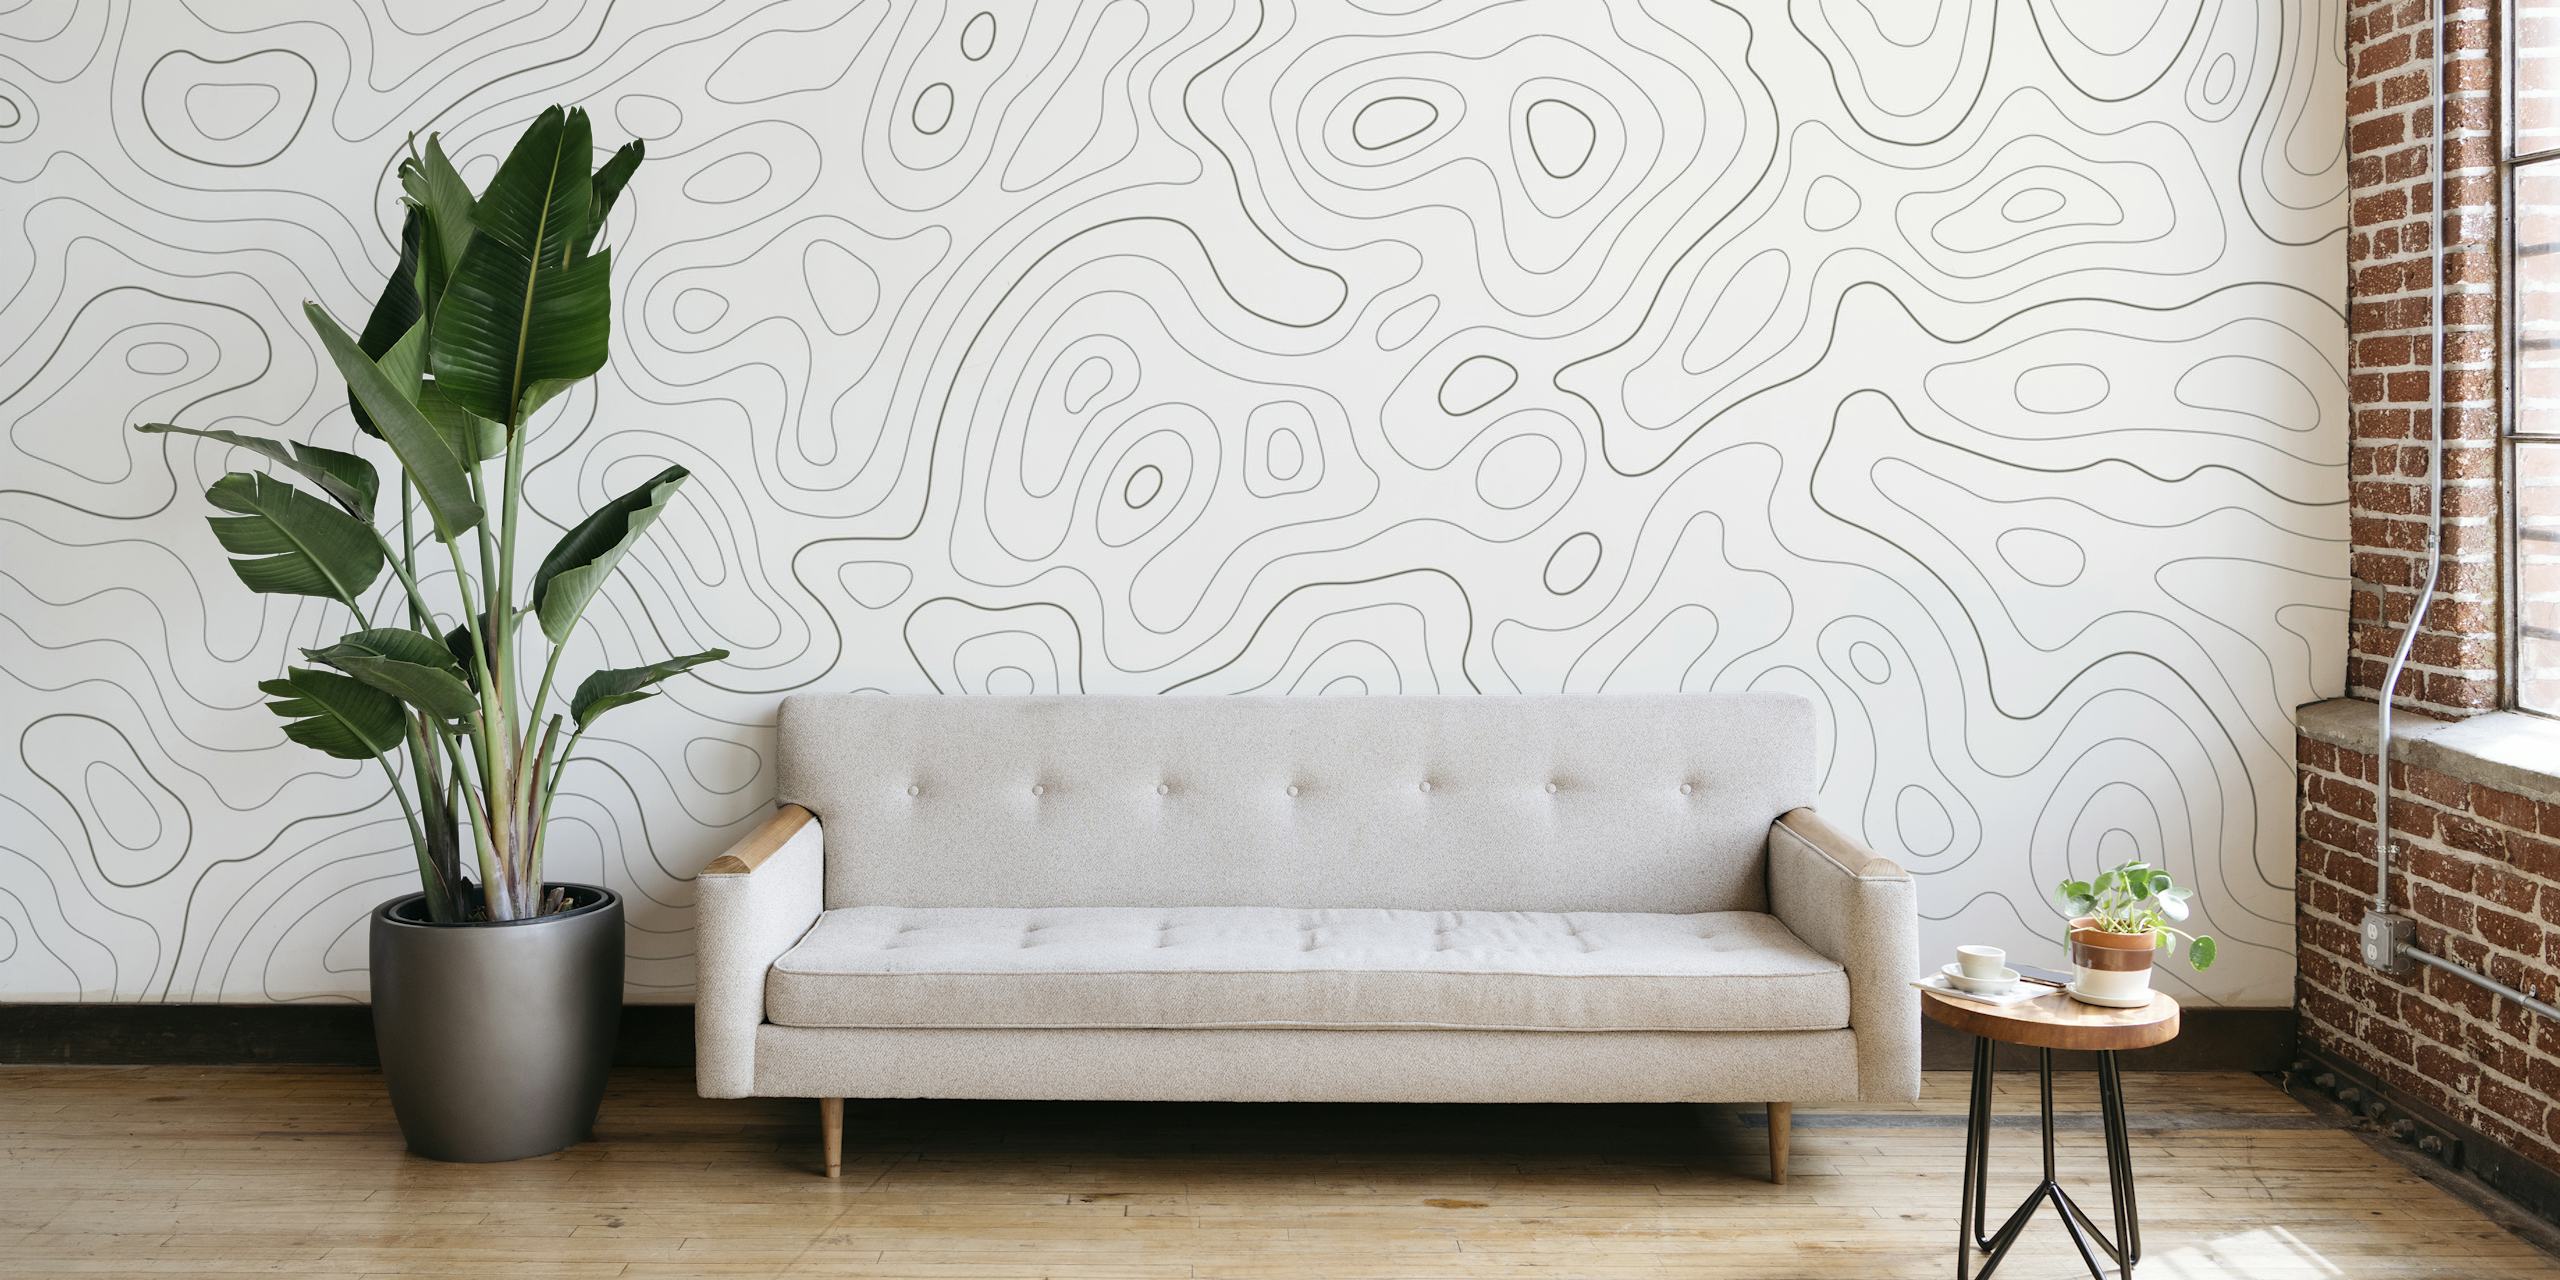 Subtle monochrome topographic map wall mural